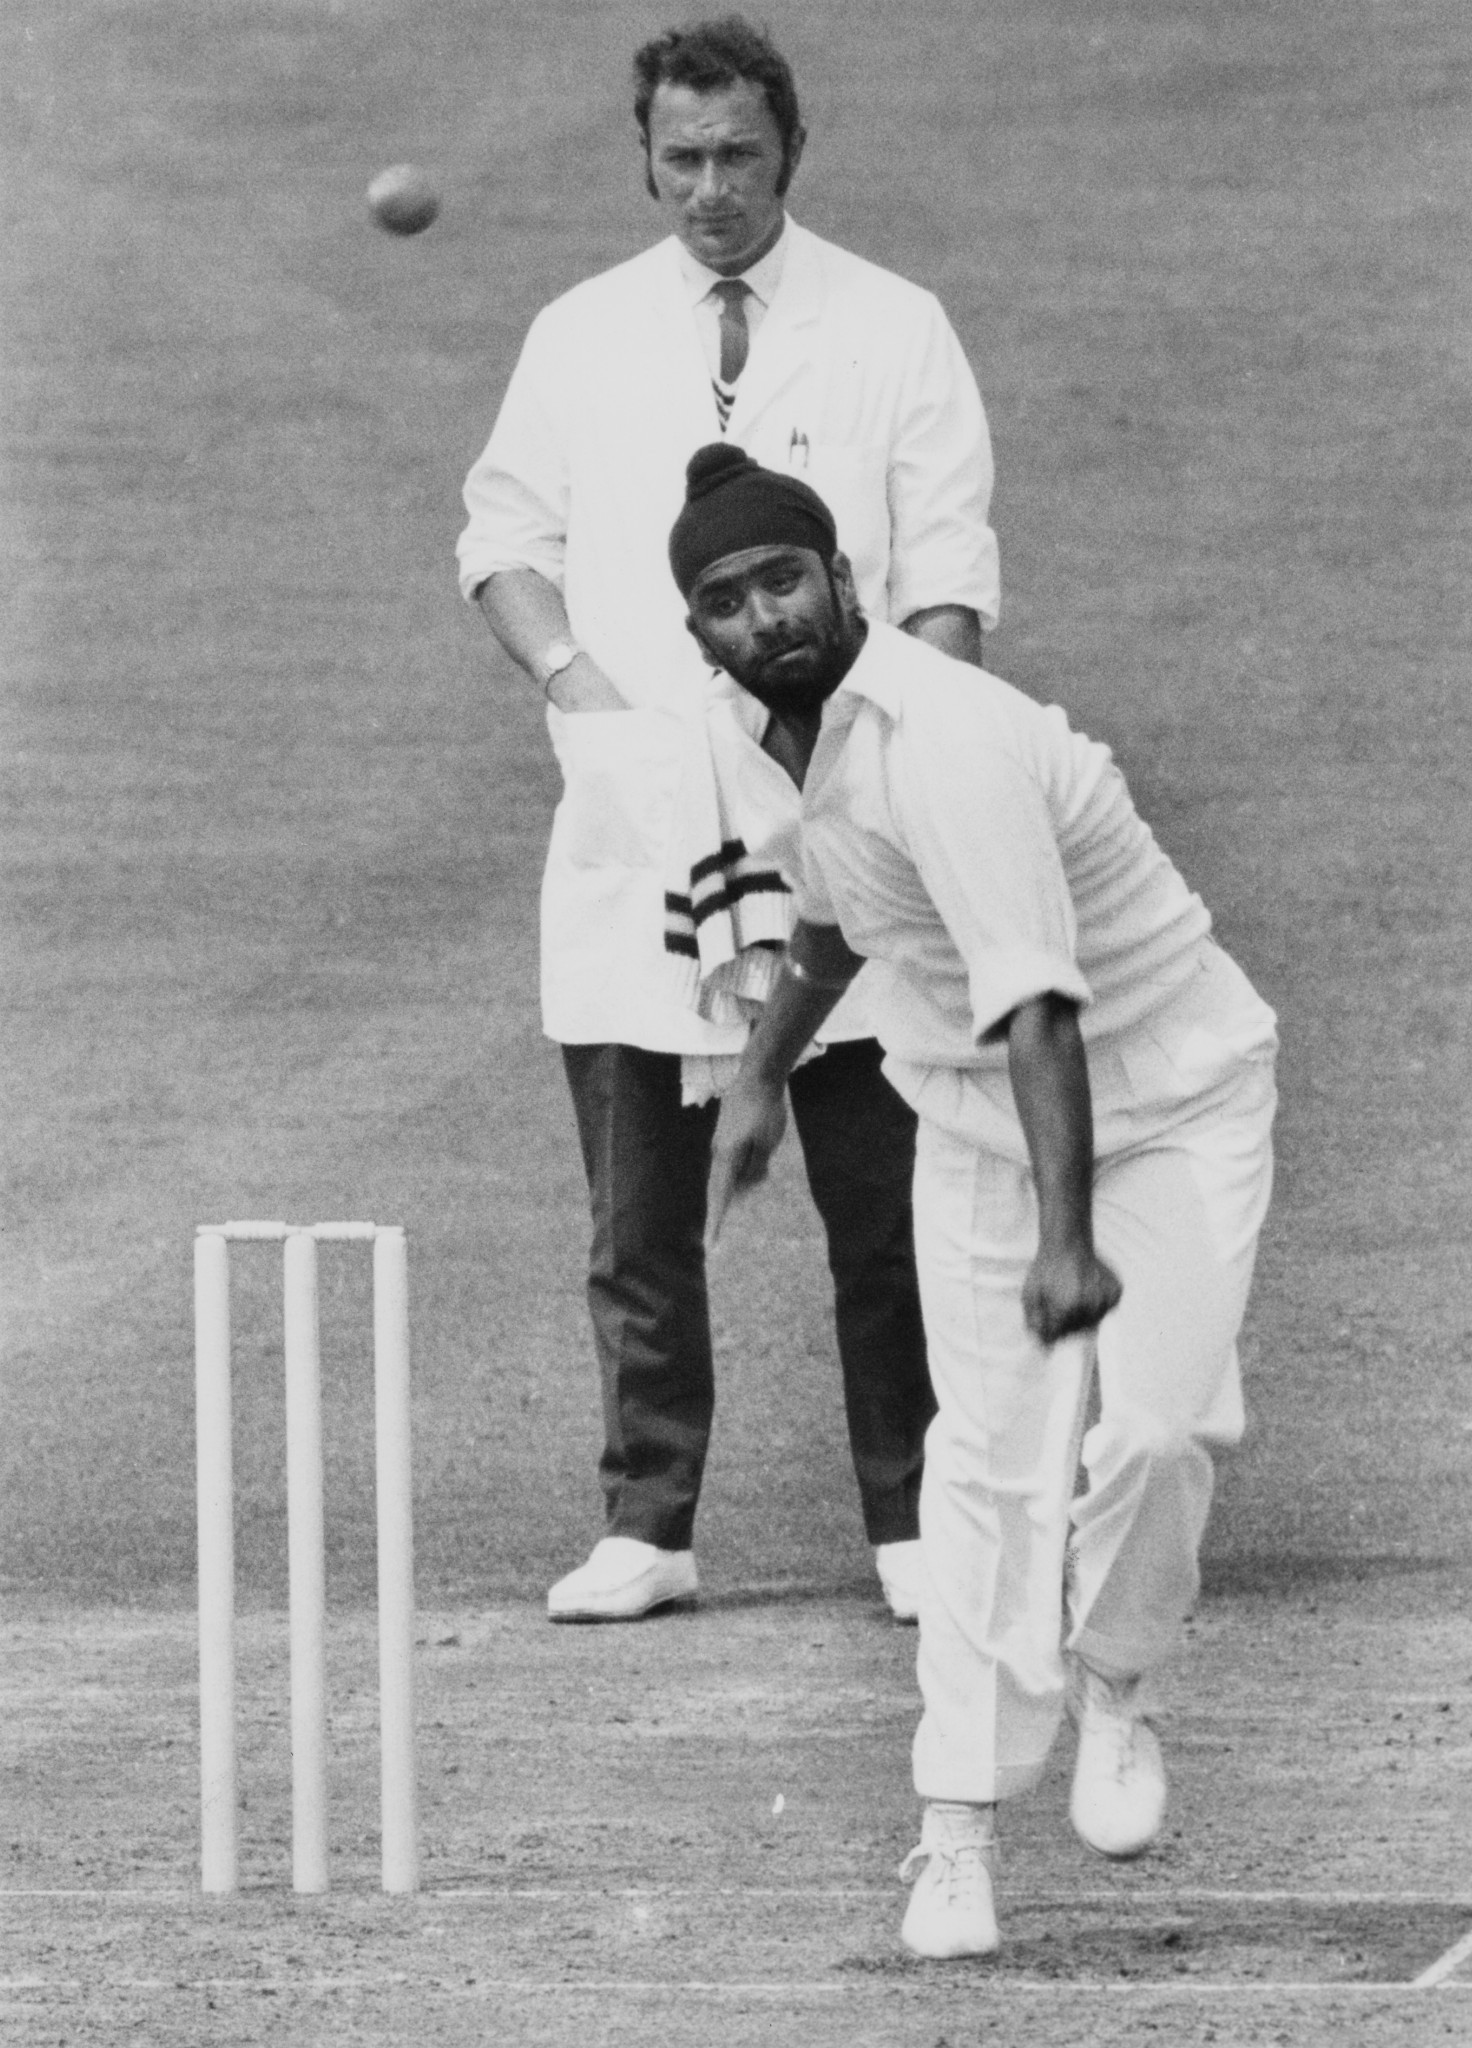 Bishan Singh Bedi was a member of India's side that claimed its first Test series victory in England in 1971 ©Getty Images